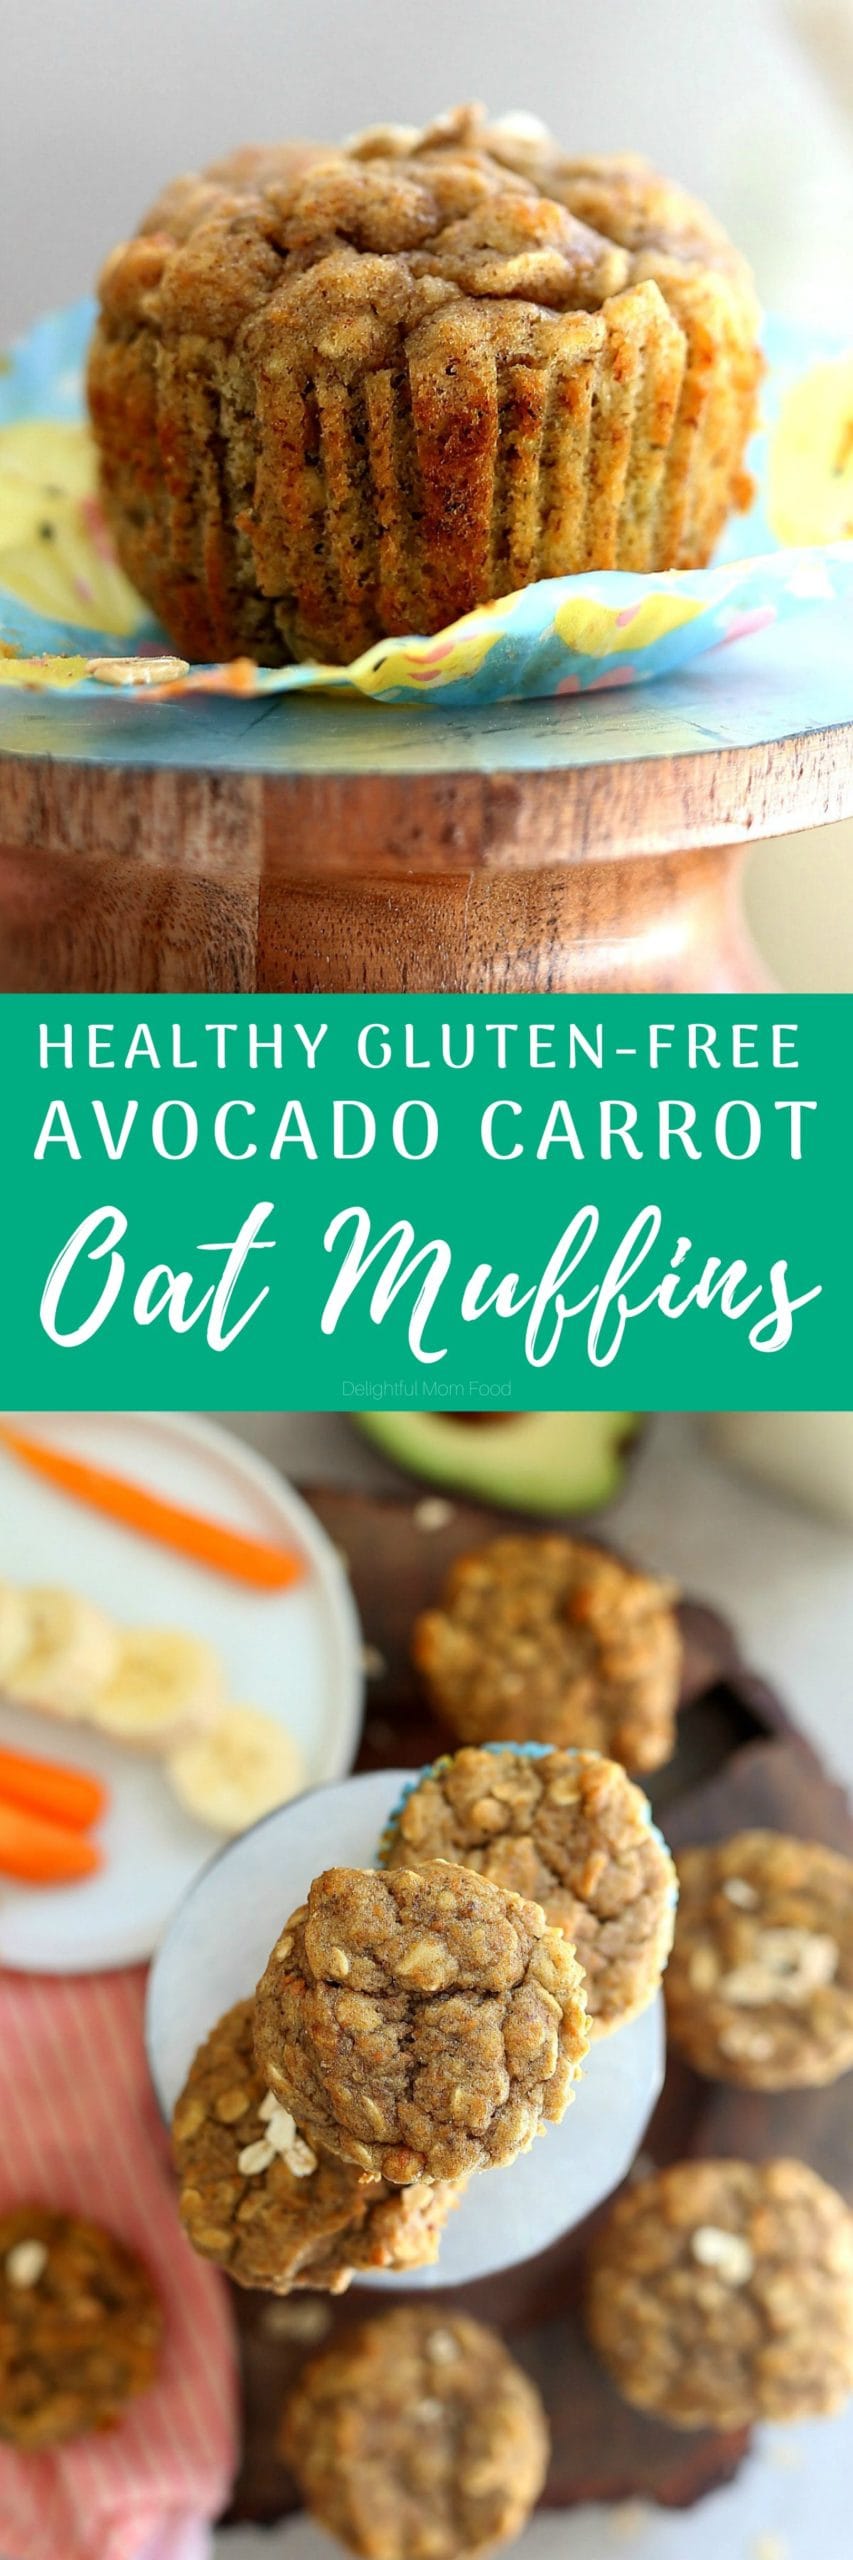 Delicious gluten-free healthy carrot muffins made with hidden added avocado, bananas and oats for a nutrient dense balanced baked good to enjoy any time of the day and when you need a healthy meal or snack in a jiffy! This one is great for kids! #glutenfreemuffin #healthycarrotmuffins #glutenfreecarrotmuffins #oatmealmuffins #healthy #recipe #muffins #easy #quick #vegetablemuffin | Recipe at Delightful Mom Food